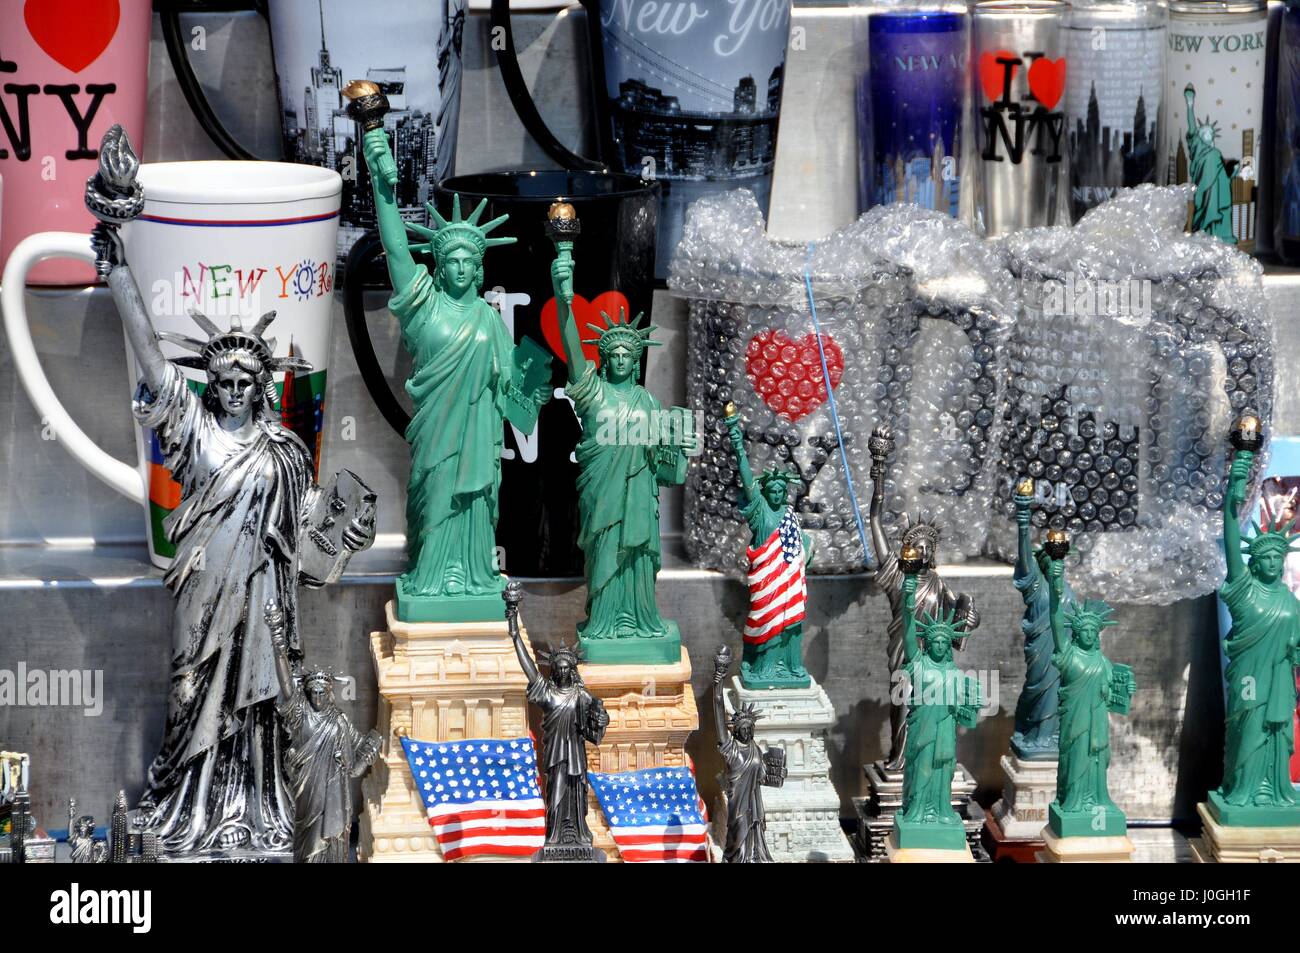 New York City - September 4, 2009: An array of NYC souvenirs on display at a vendor's cart in Battery Park Stock Photo